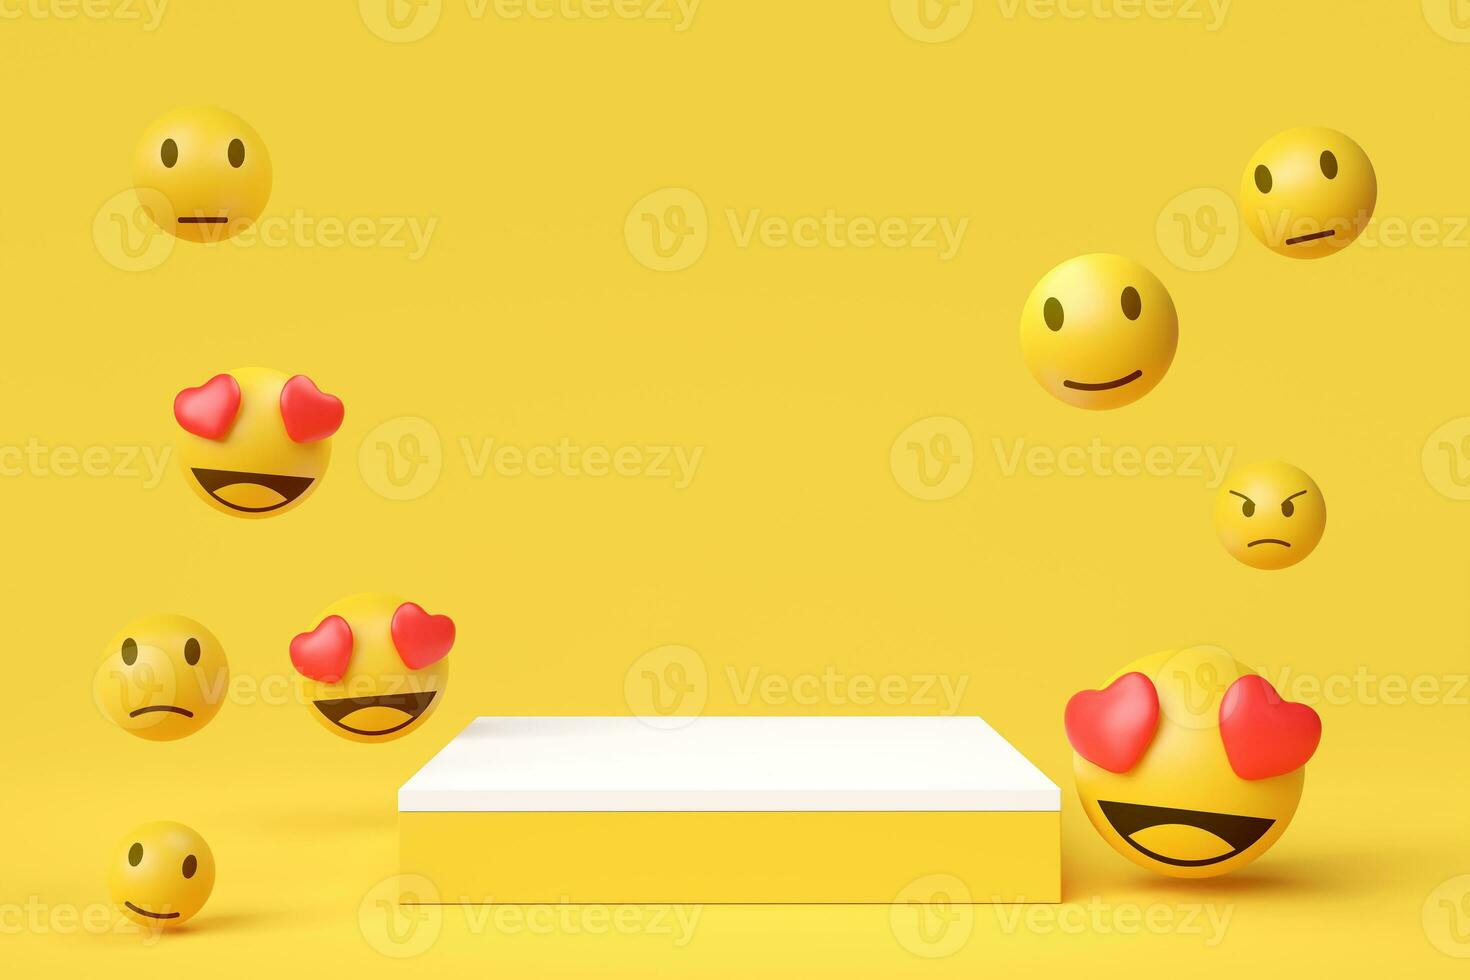 Yellow emoji background with a podium for design service satisfaction assessment concept Product show and award ceremony photo